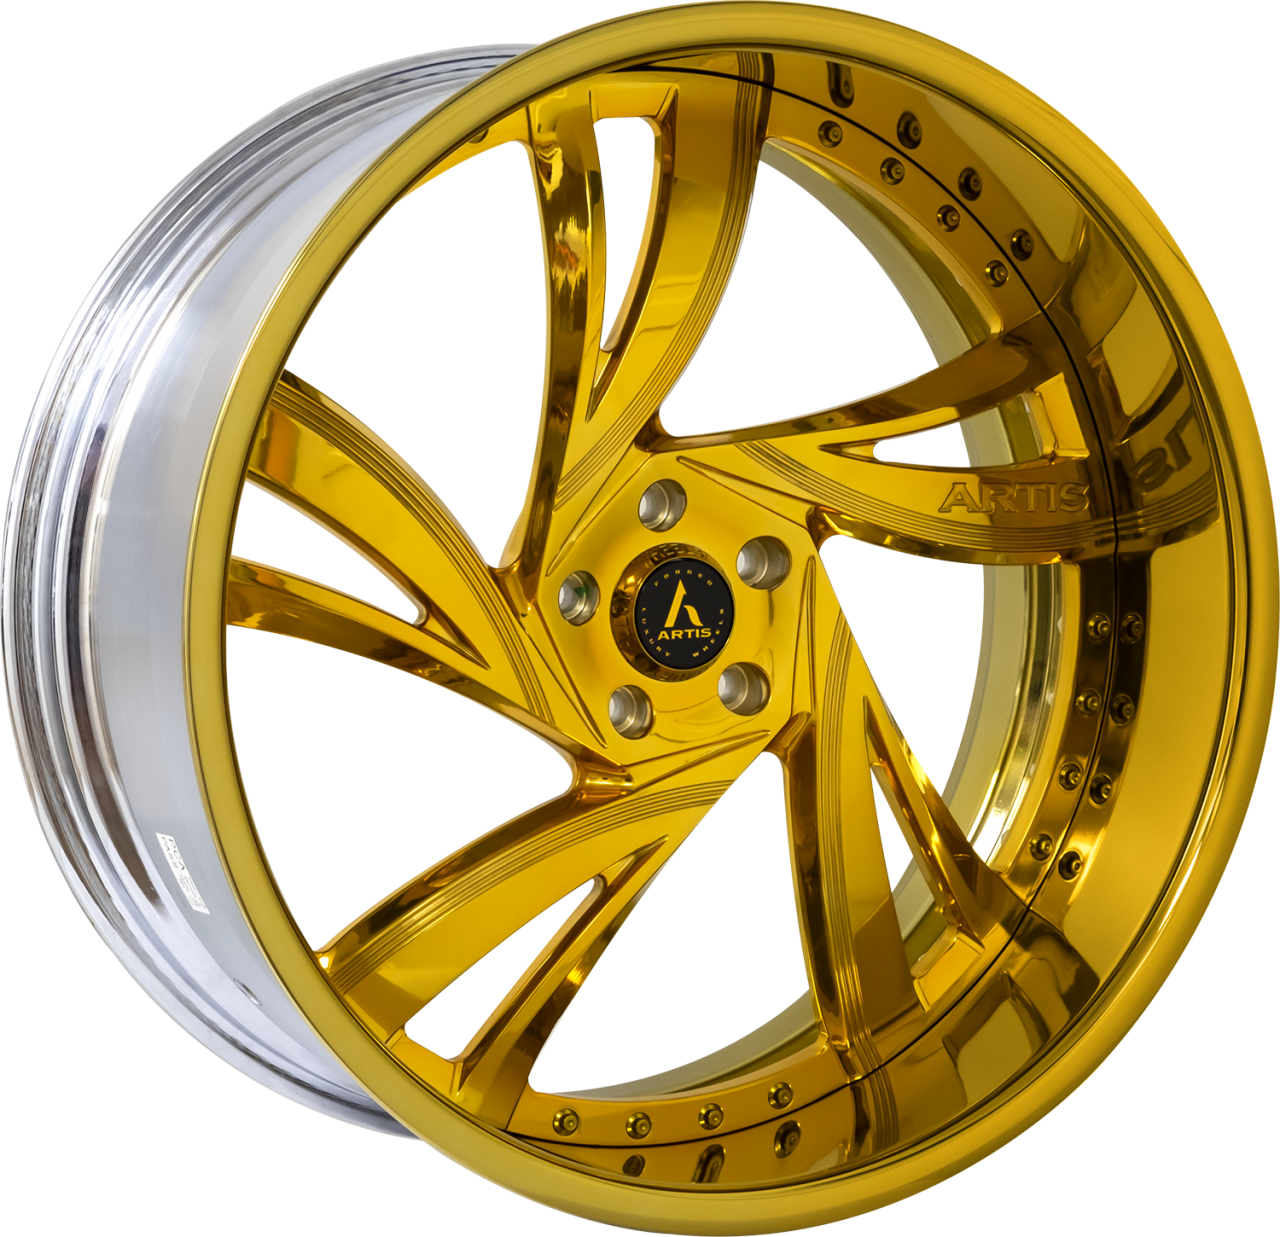 Artis Forged Kingston wheel with Gold finish